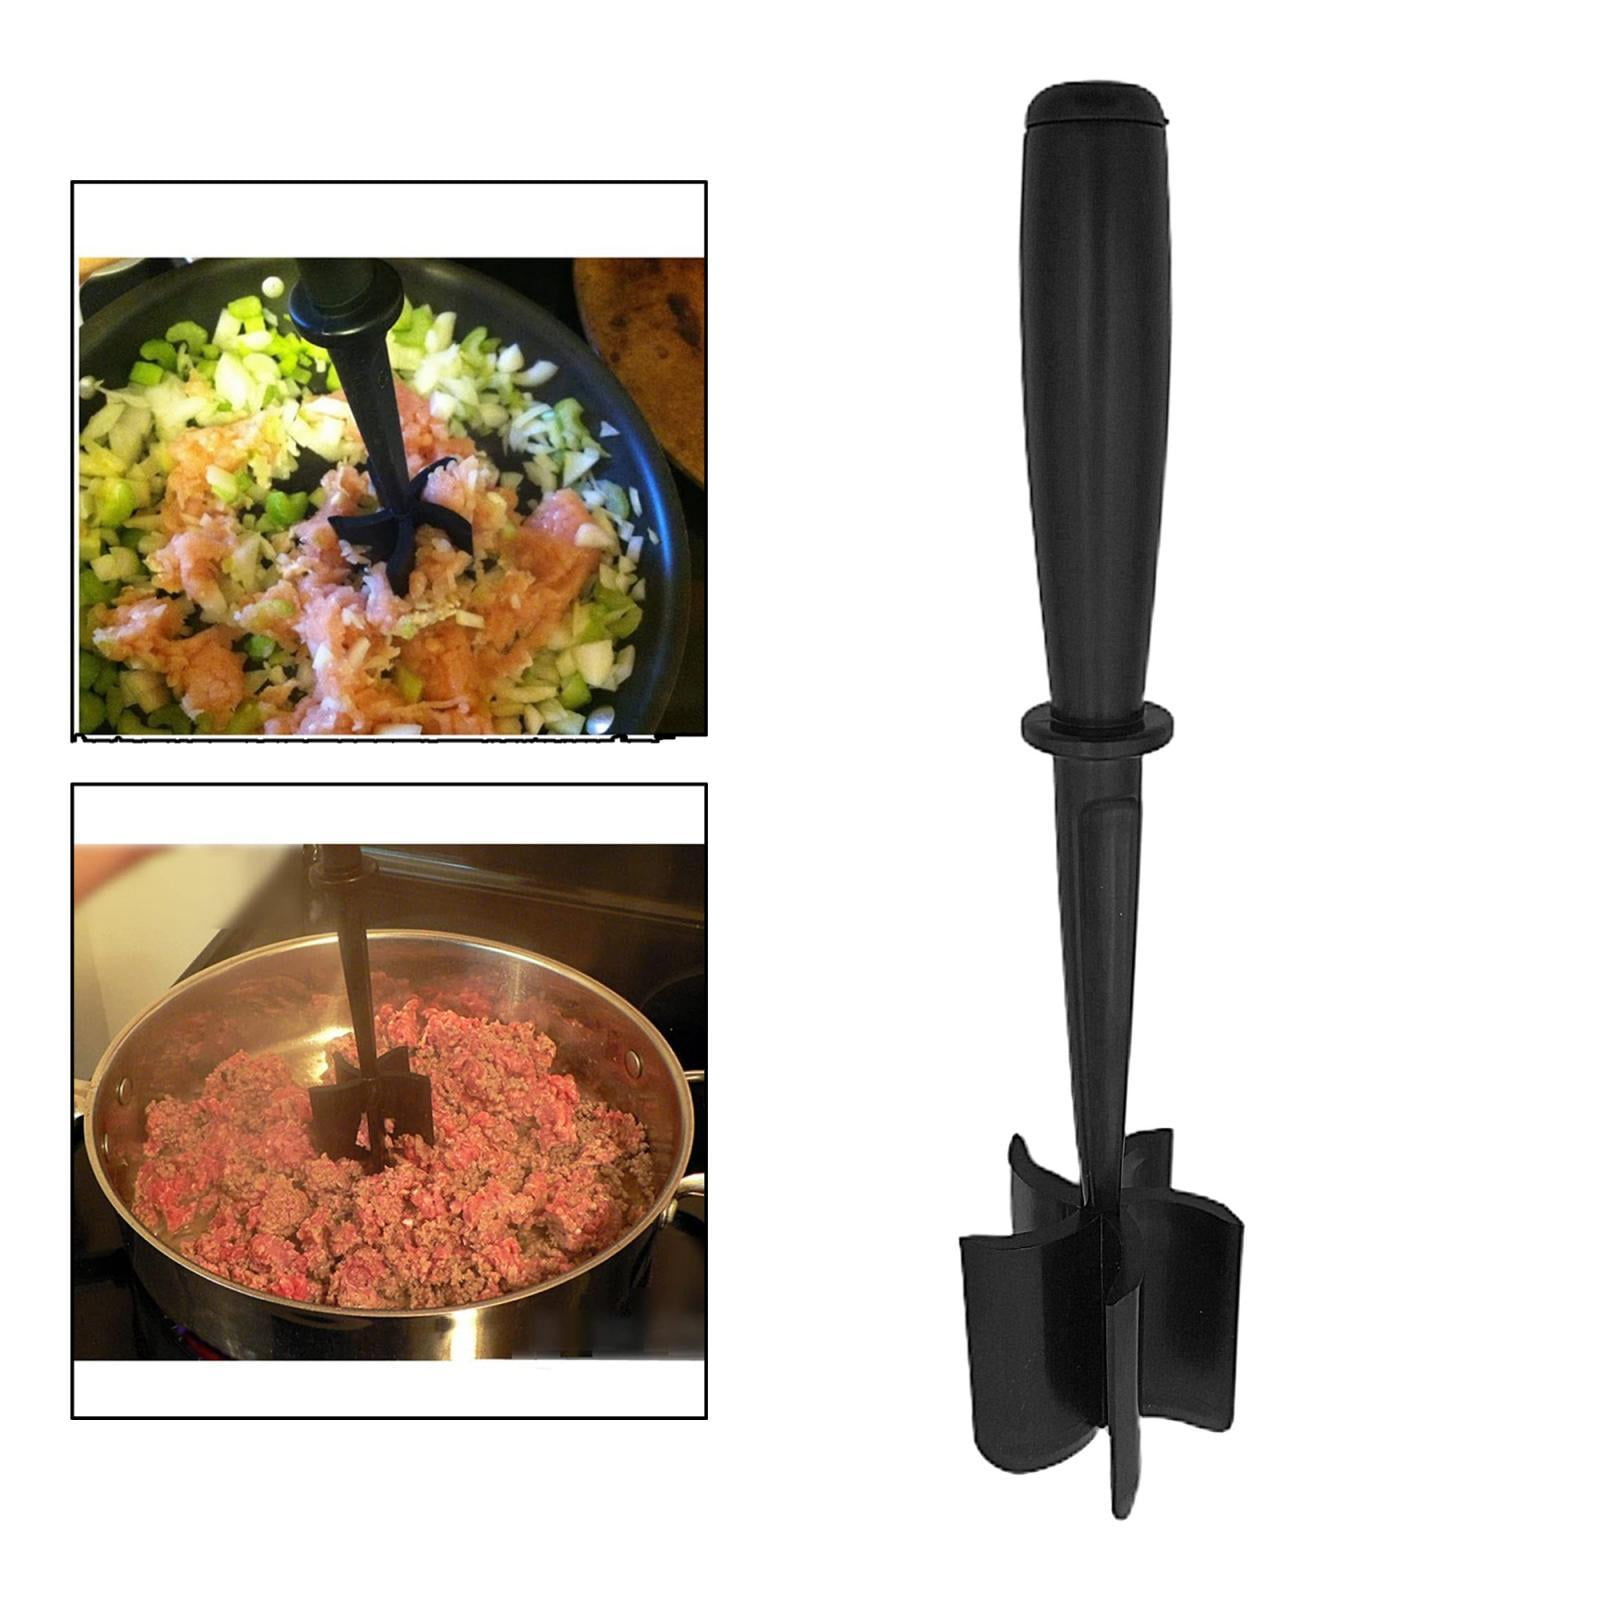 PGYARD Meat Chopper, Hamburger Chopper, Multifunctional Heat Resistant  Masher and Smasher for Hamburger Meat, Ground Beef